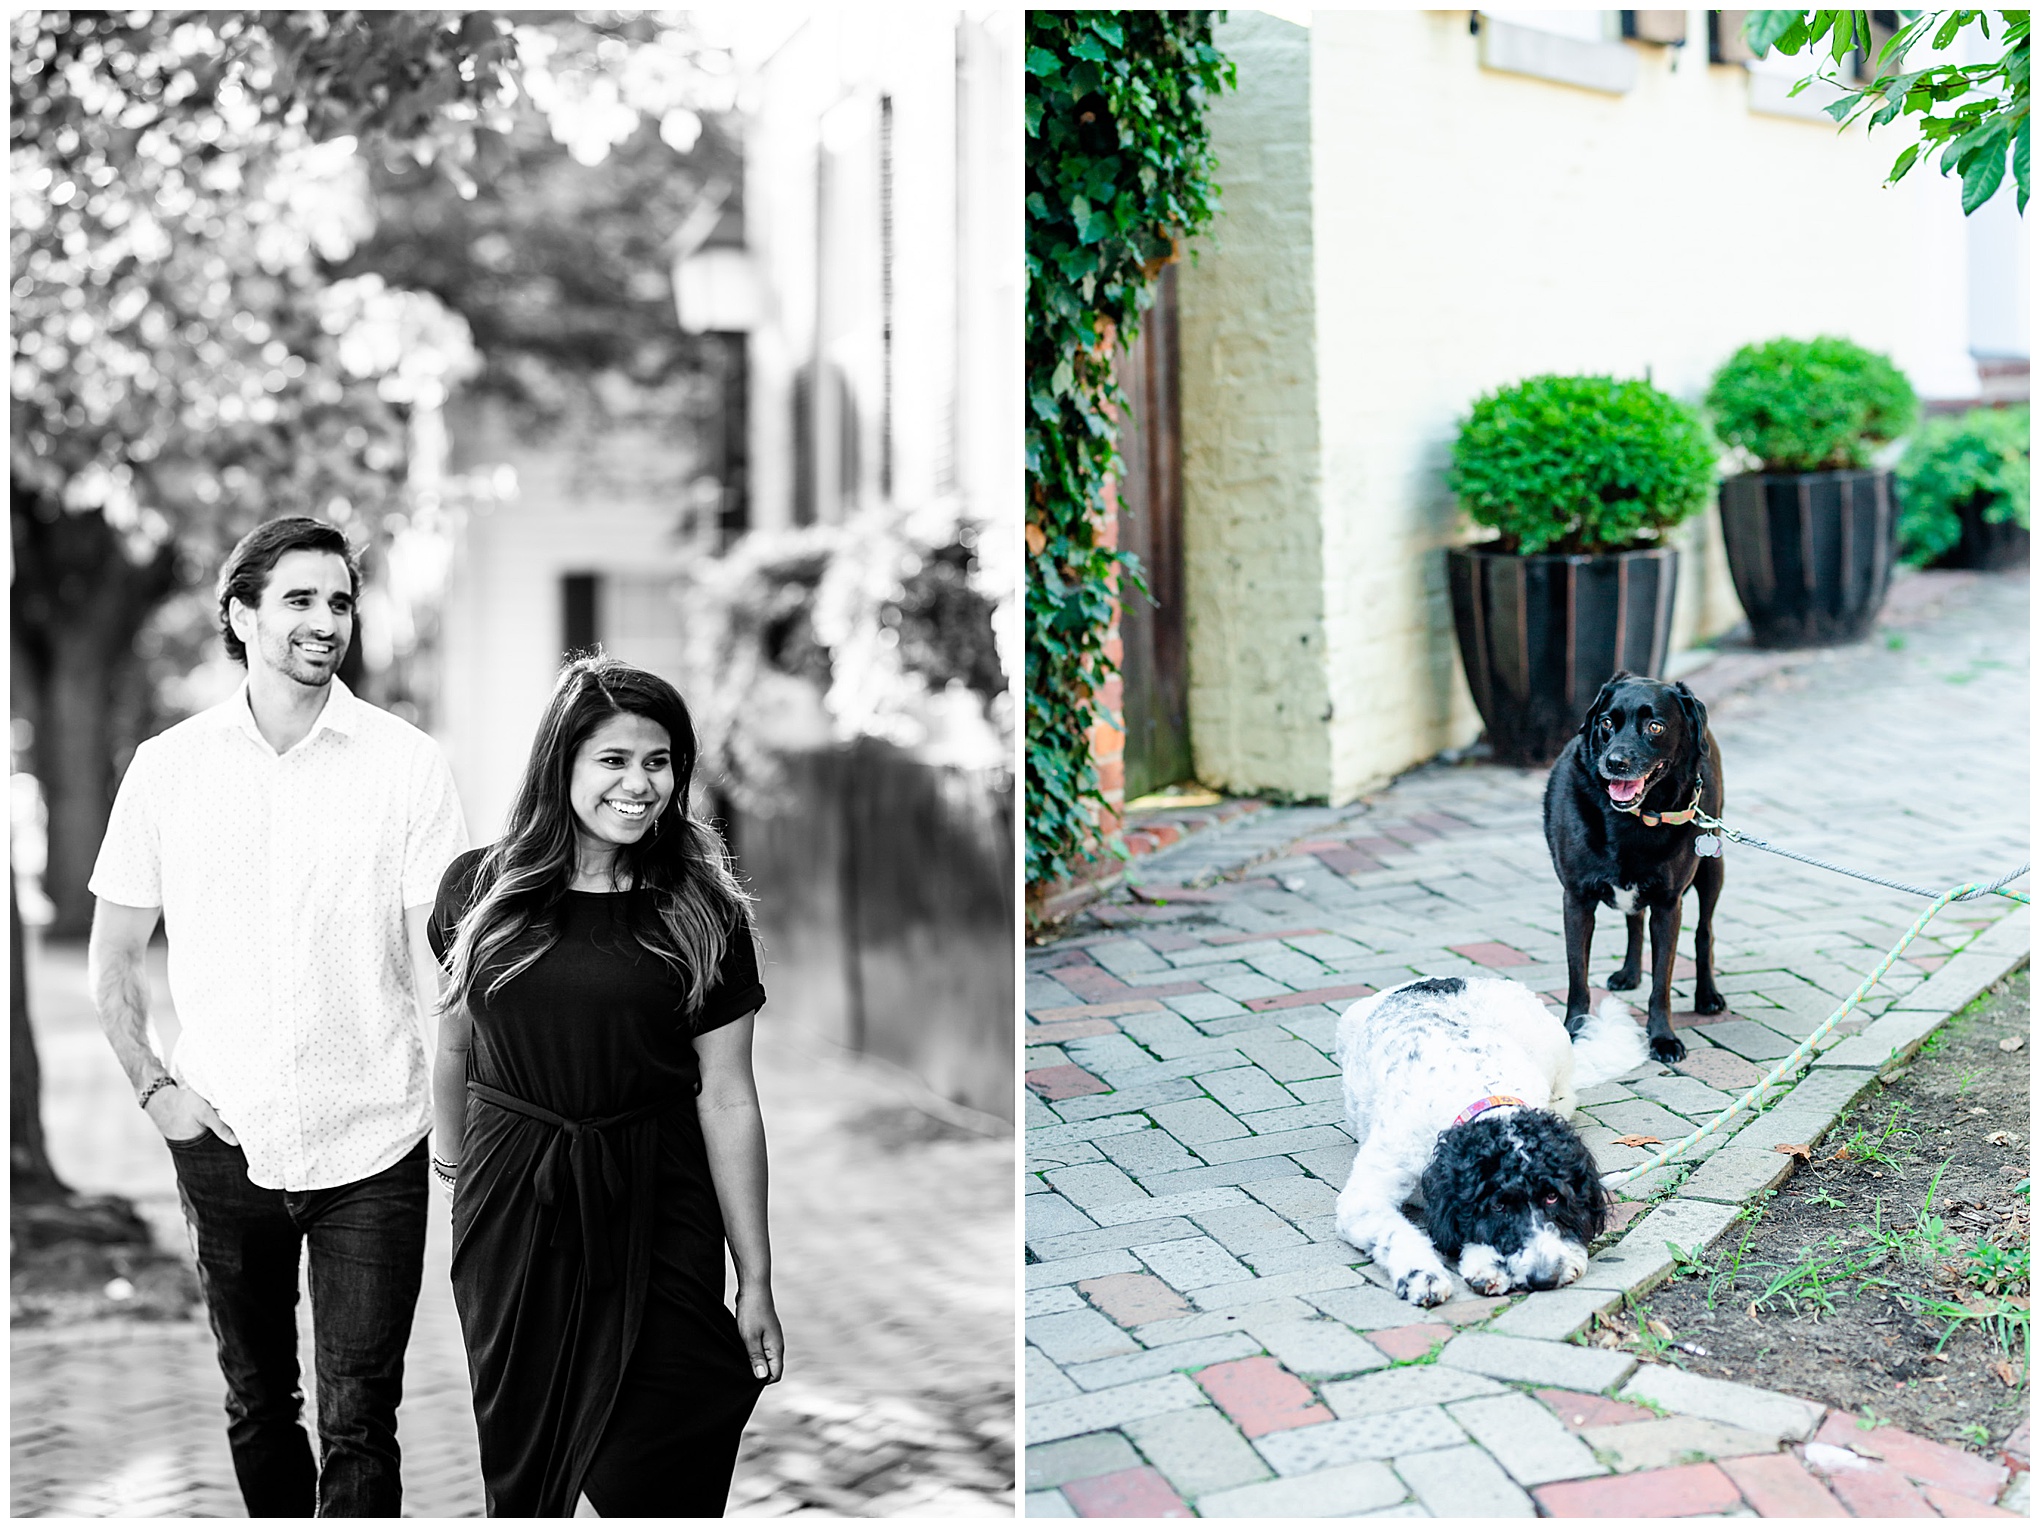 Old Town Alexandria engagement photos, Alexandria engagement photos, Old Town Alexandria photos, Old Town Alexandria, Alexandria engagement photos, Alexandria Virginia, classic engagement photos, historic town engagement photos, engagement photos, Rachel E.H. Photography, black and white engagement photo, two dogs